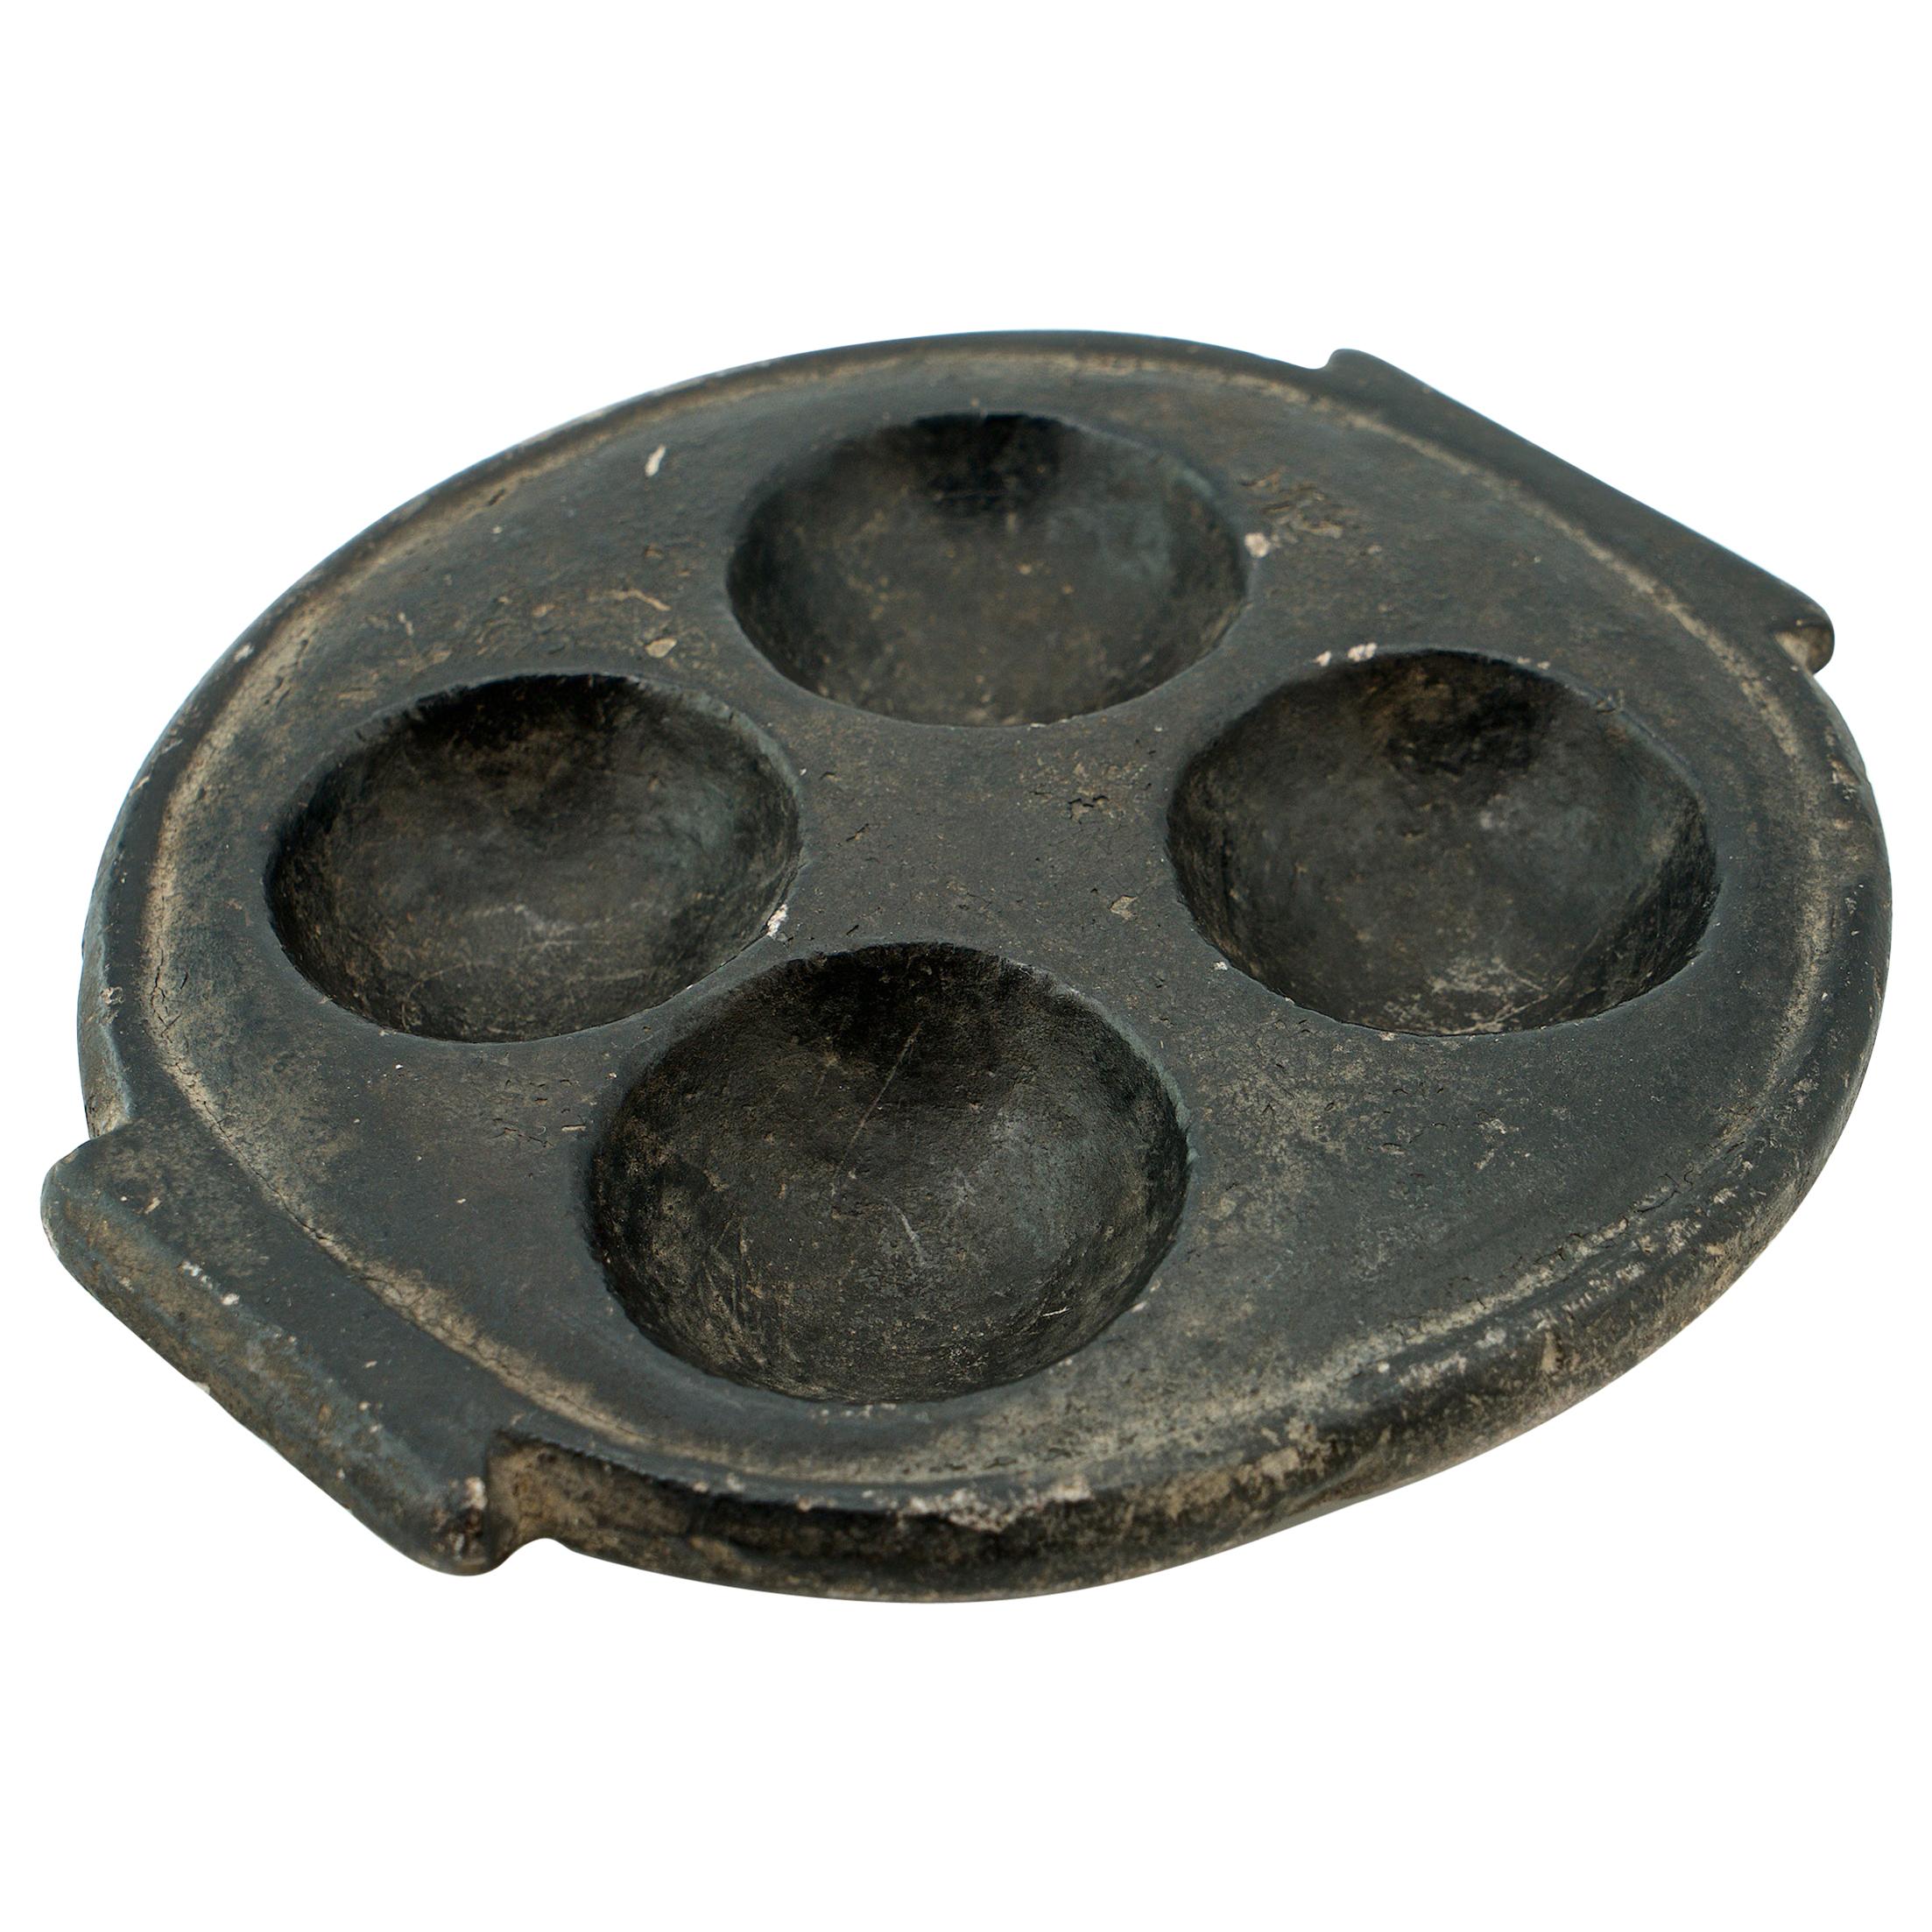 African Black Stone Palette Dish Bowl Ashtray Relief Sculpture